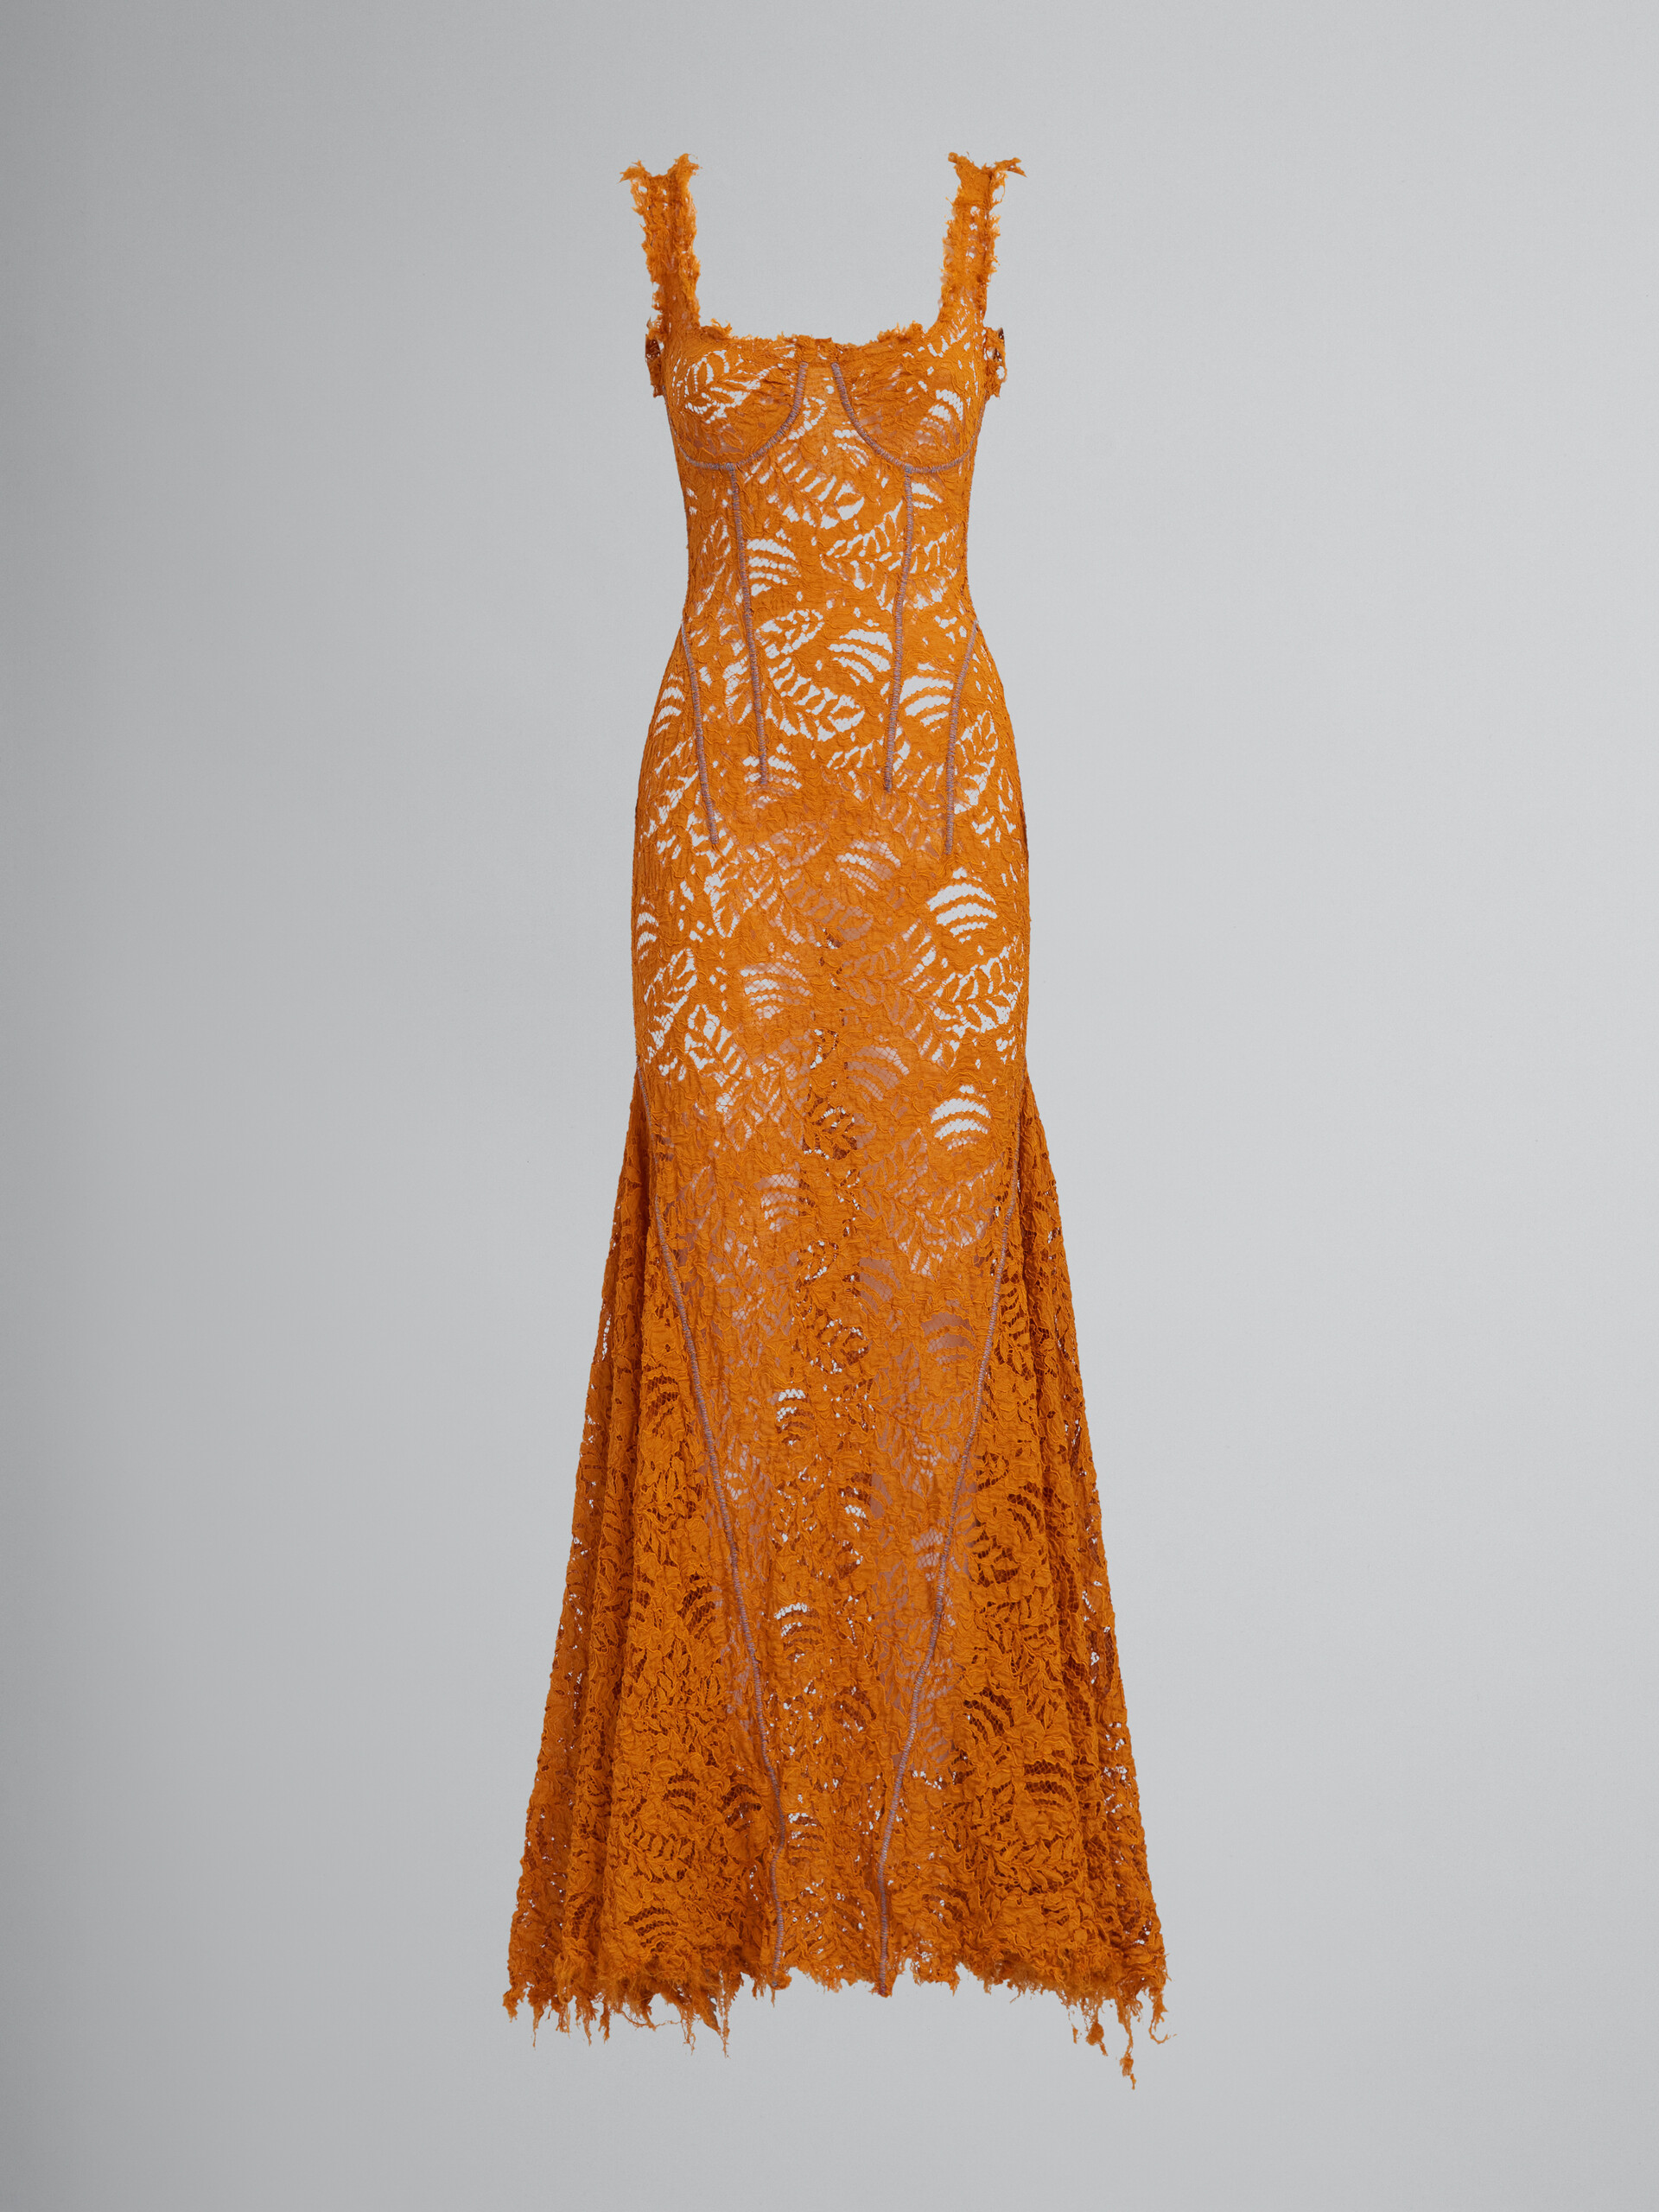 Long dress in gold-tone lace - Dresses - Image 1